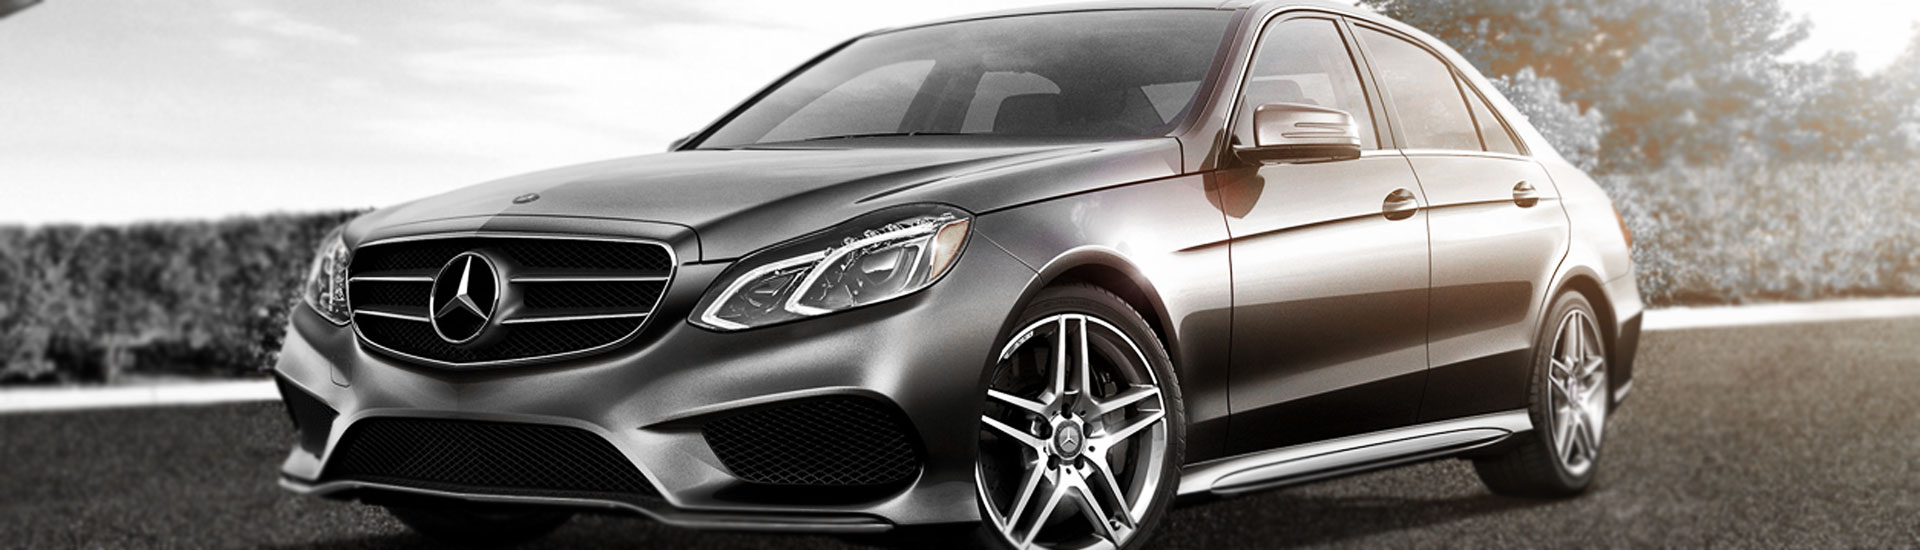 All Windows Any Shade Details about   Precut Window Tint for Mercedes E400 Sedan 17-18 